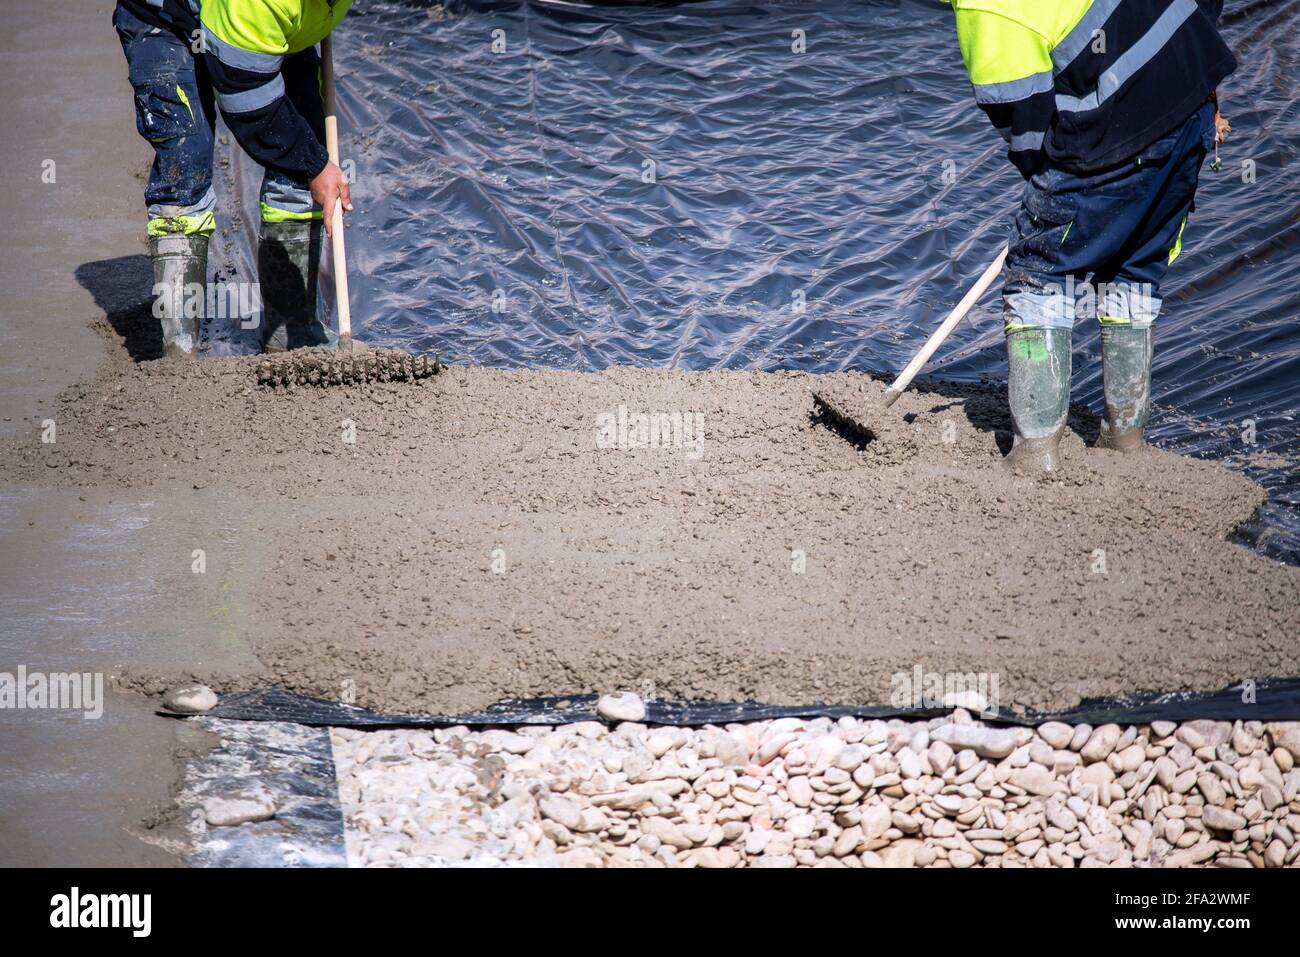 Two construction workers at work pouring a mixture on a floor with a plastic sheet. Stock Photo